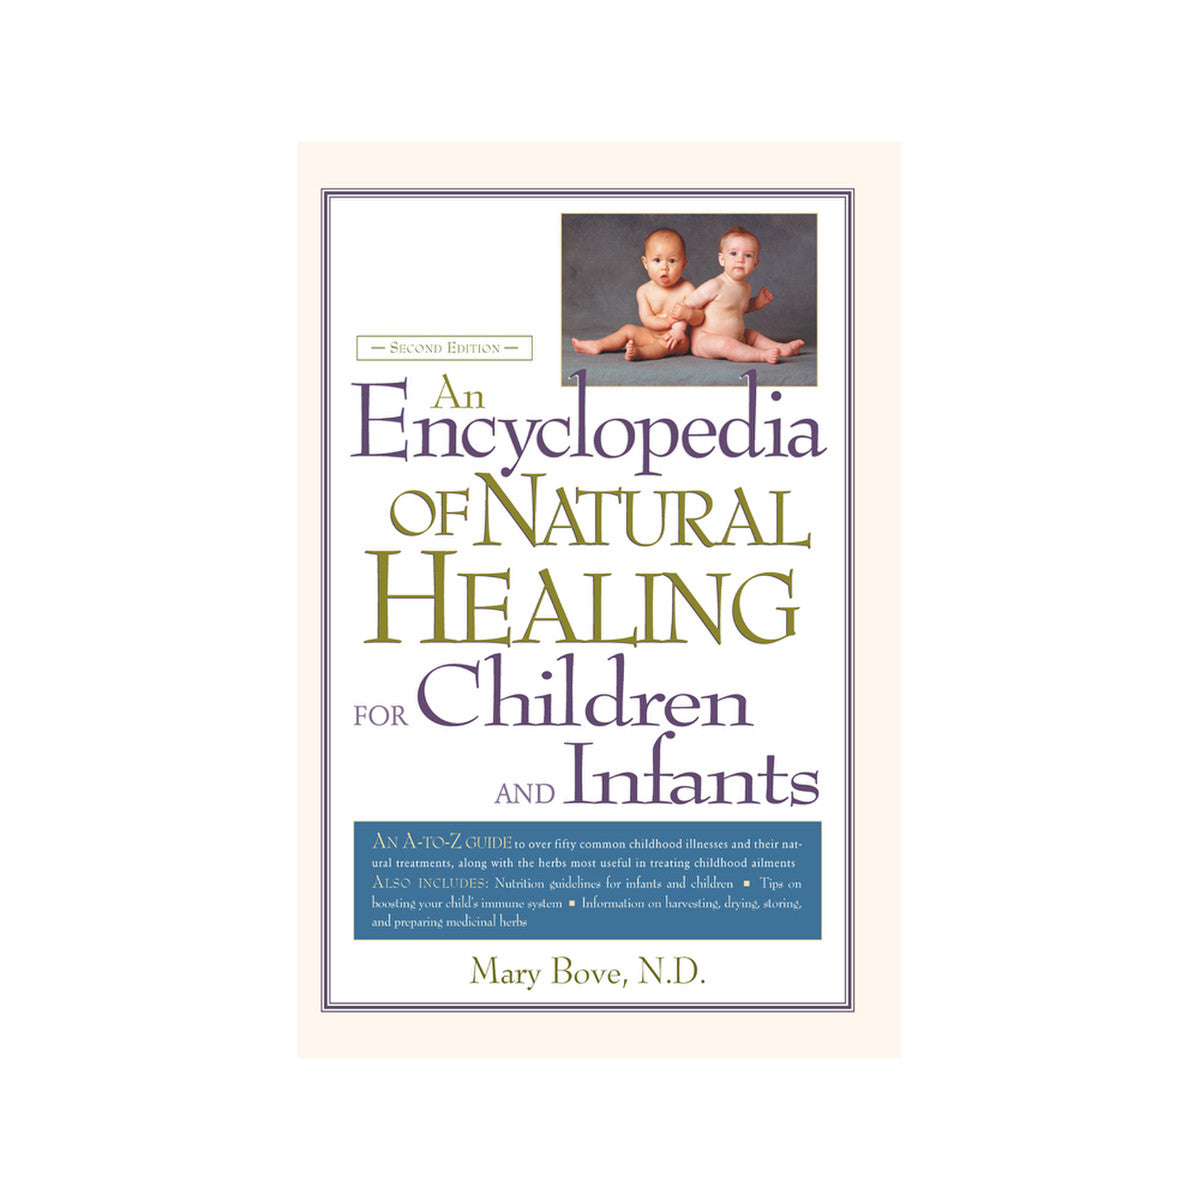 Encyclopedia of Natural Healing for Children & Infants by Dr. Mary Bove